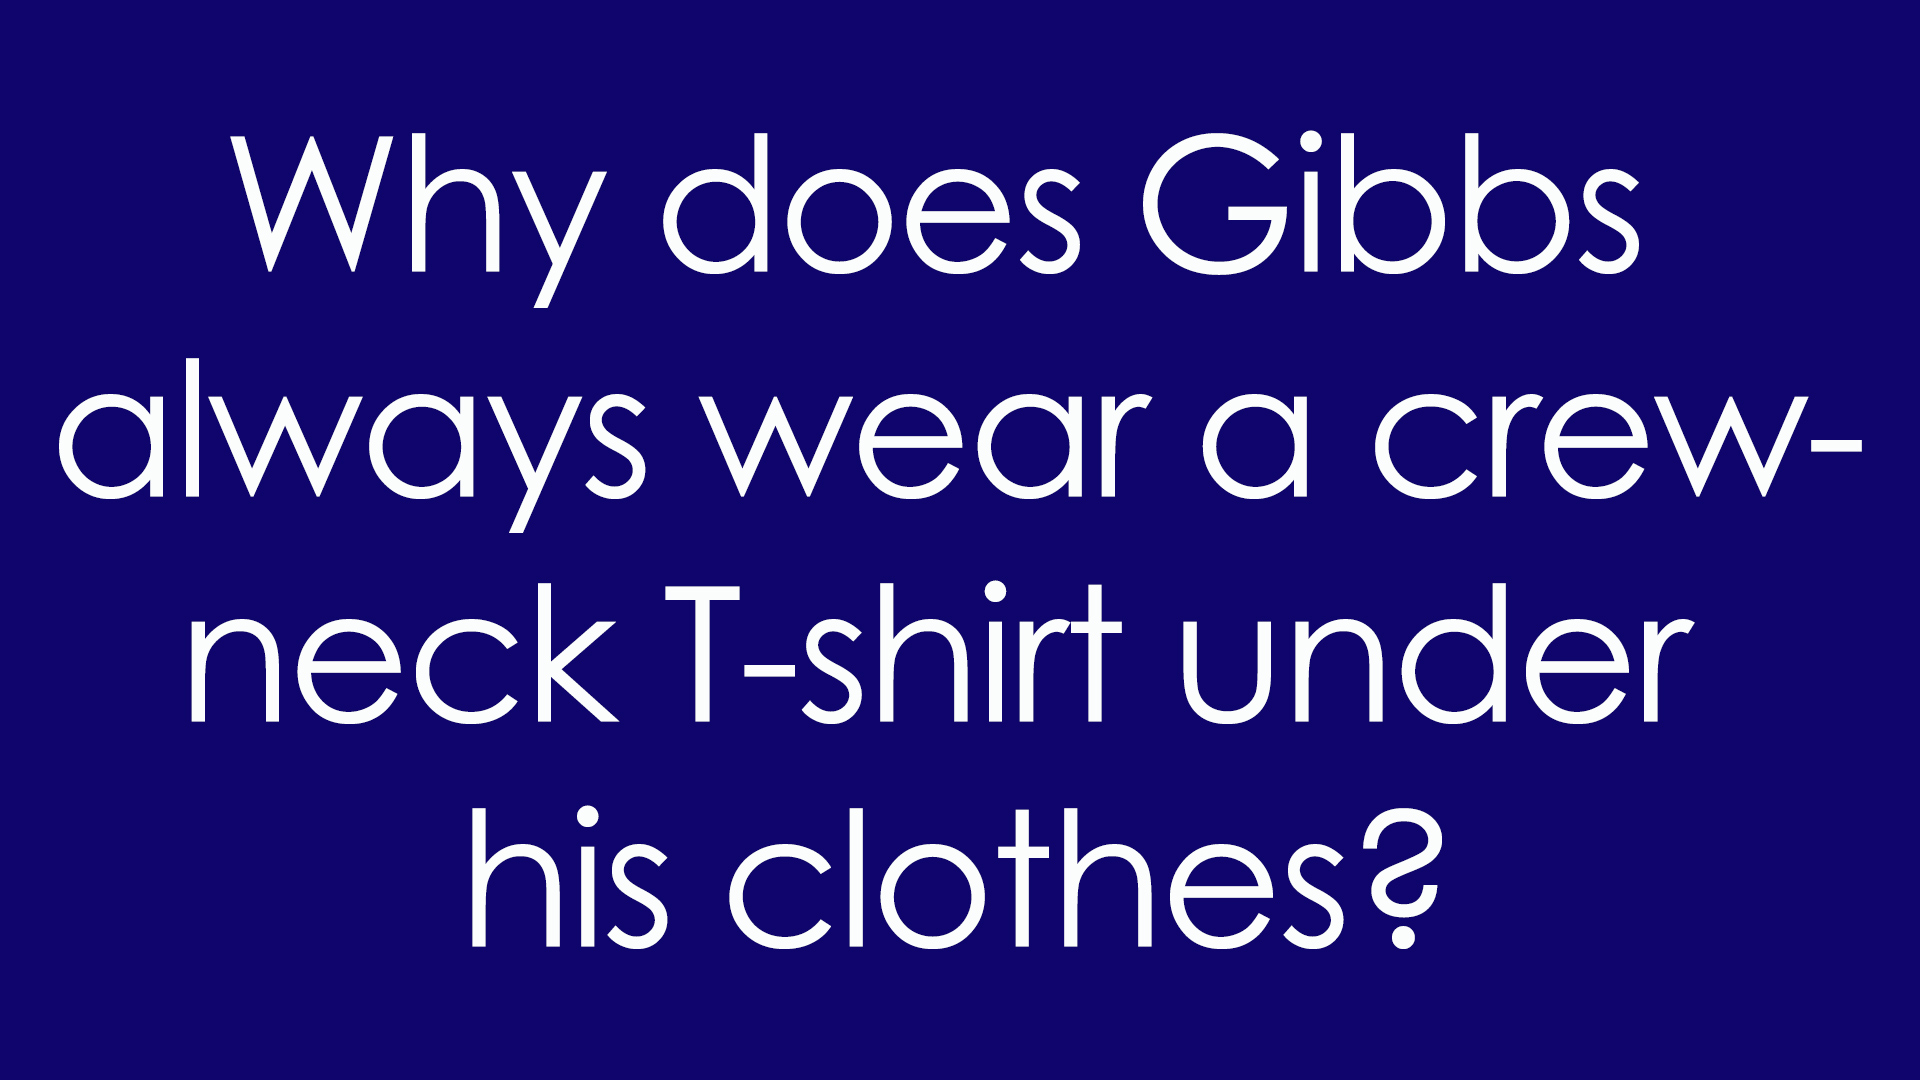 6. Why does Gibbs always wear a crew-neck T-shirt under his clothes?